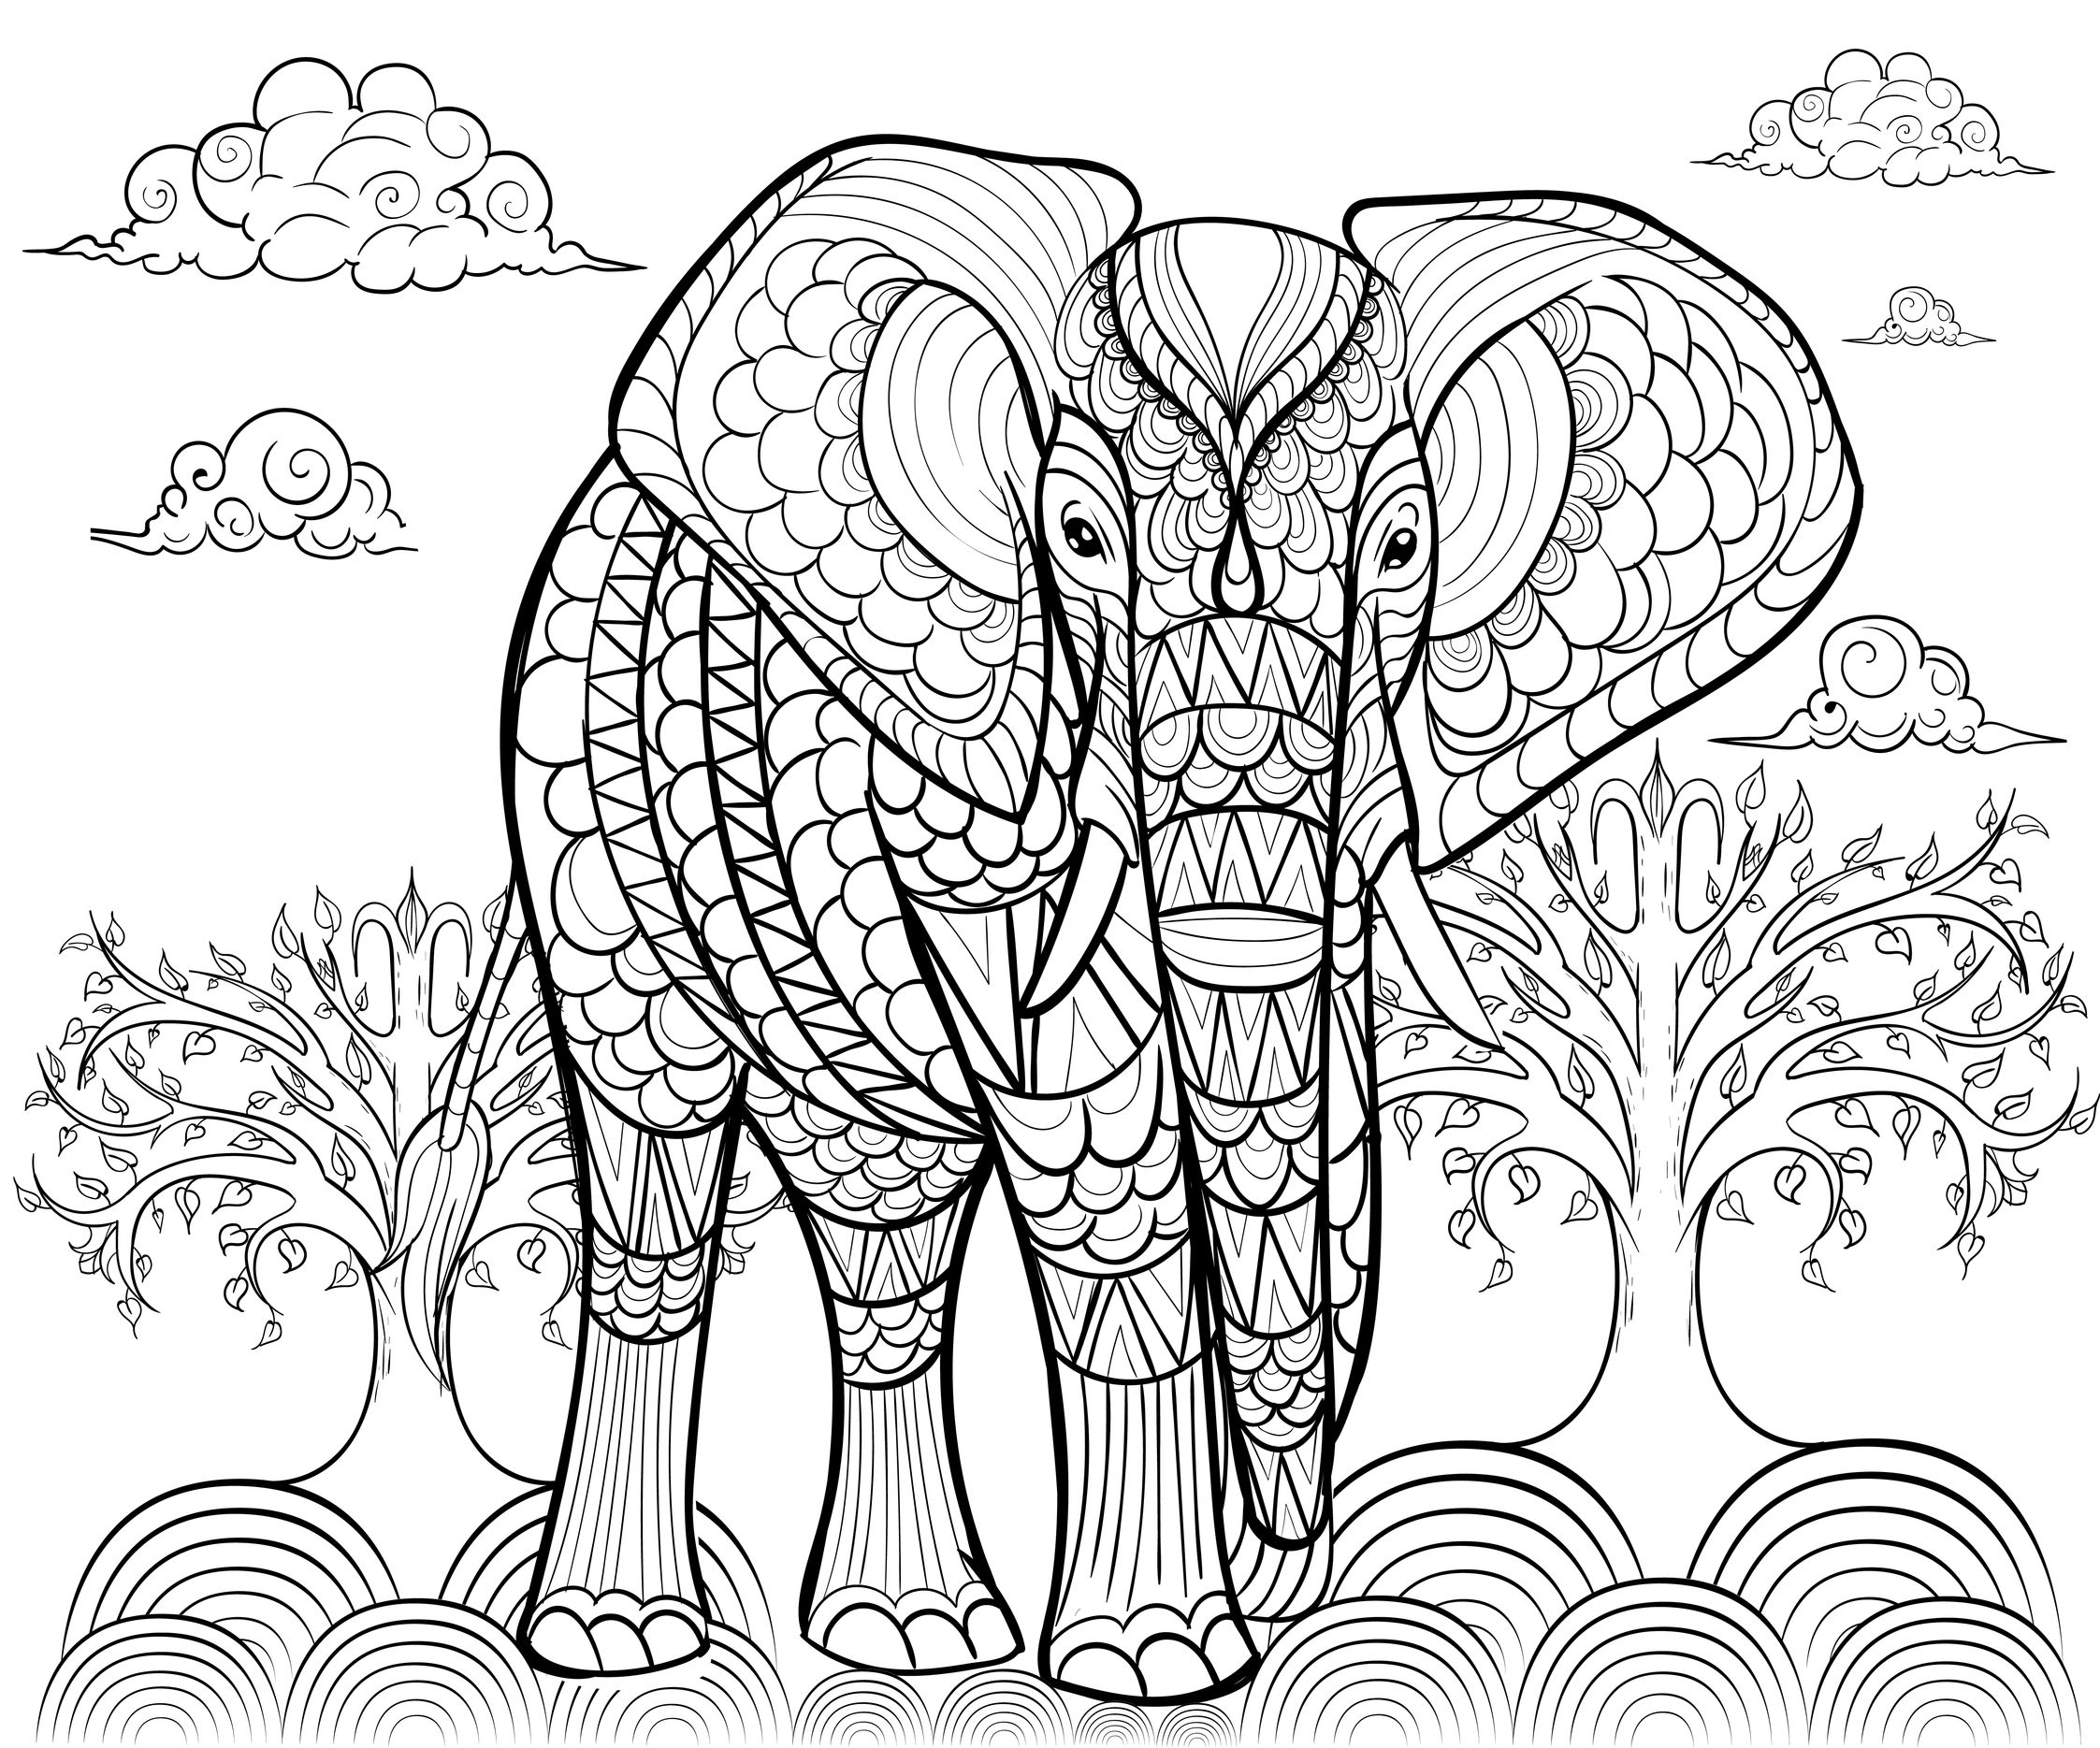 Download Pages elephant by alfadanz | Animals - Coloring pages for adults | JustColor